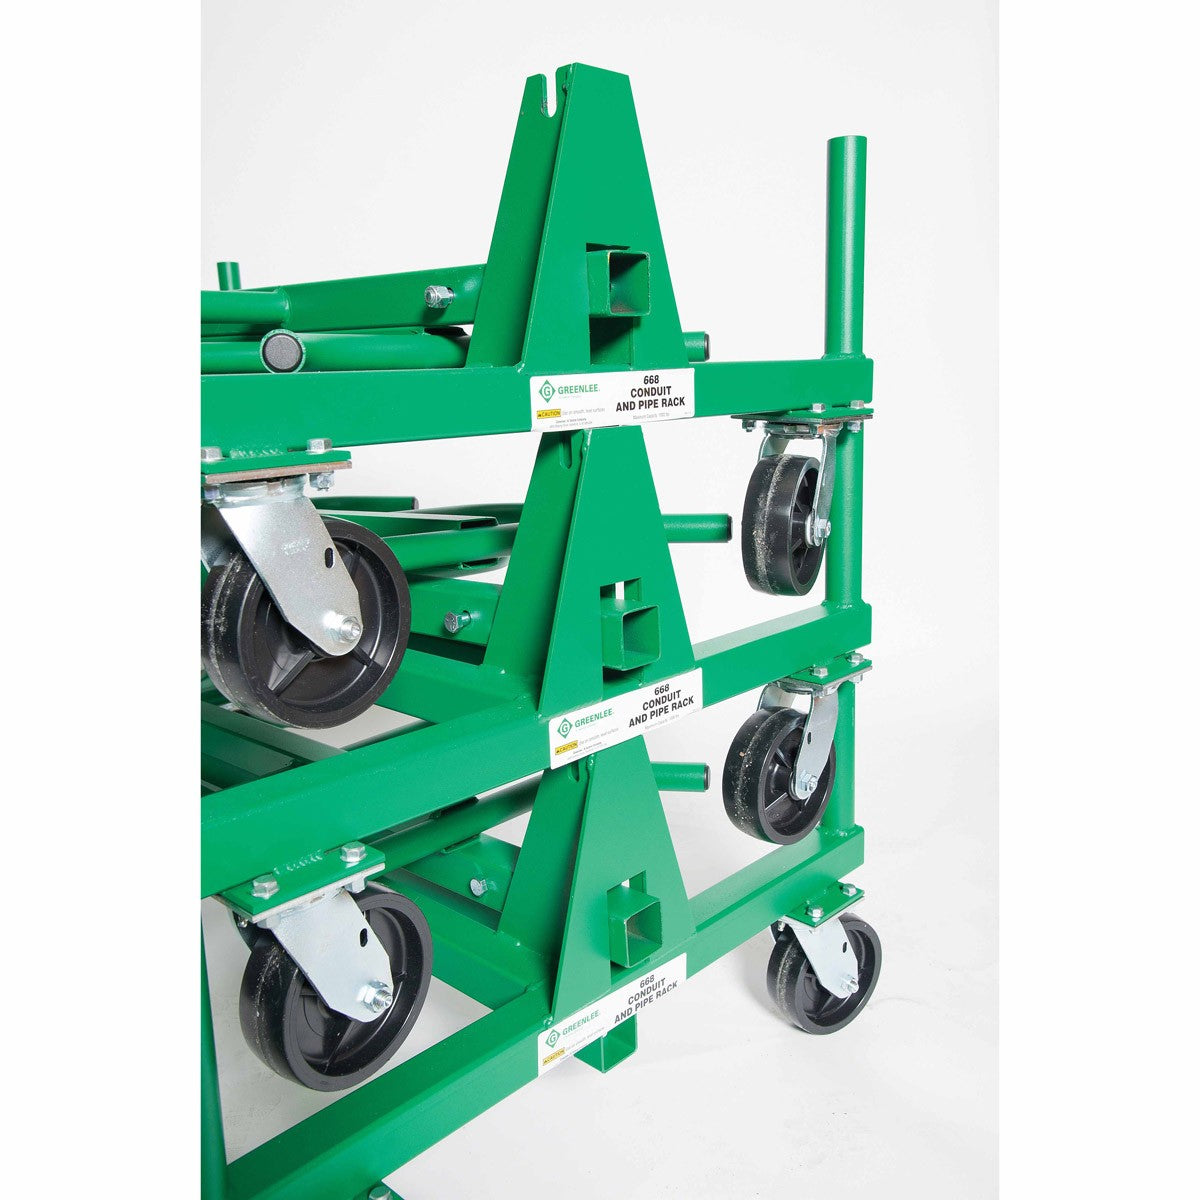 Greenlee 668 Mobile Conduit and Pipe Rack with Casters